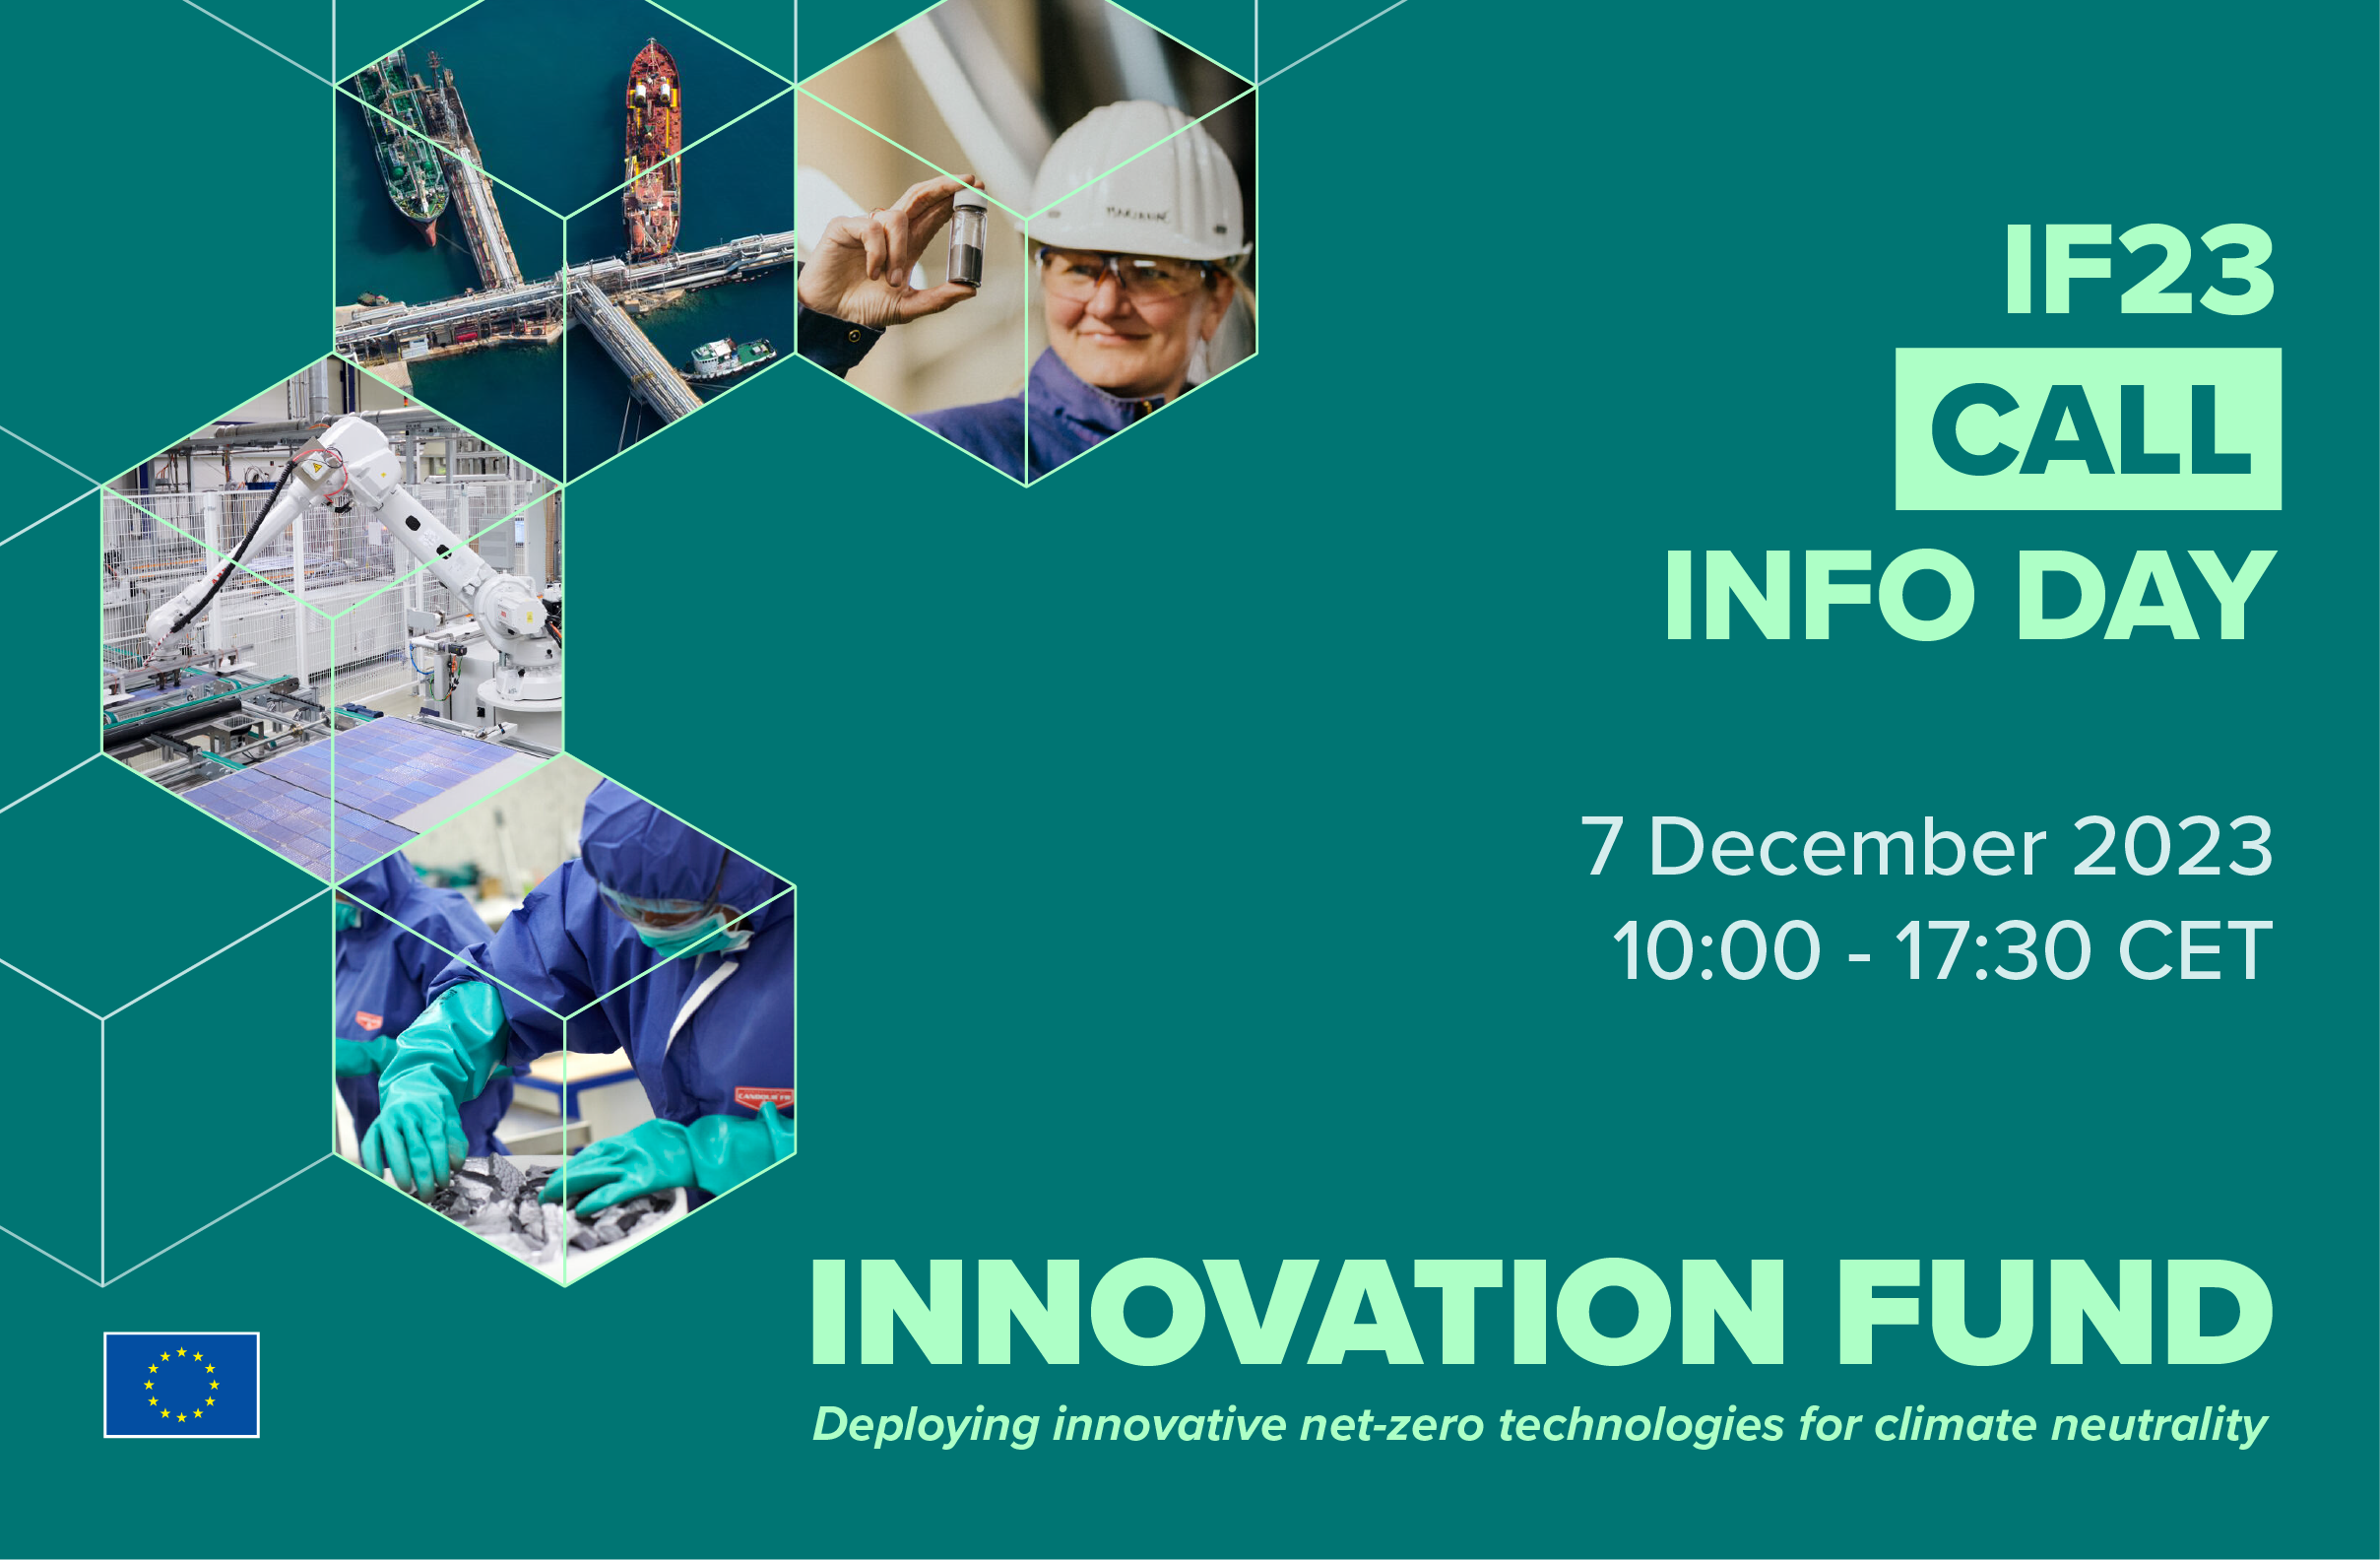 Innovation Fund 2023 Call Info Day